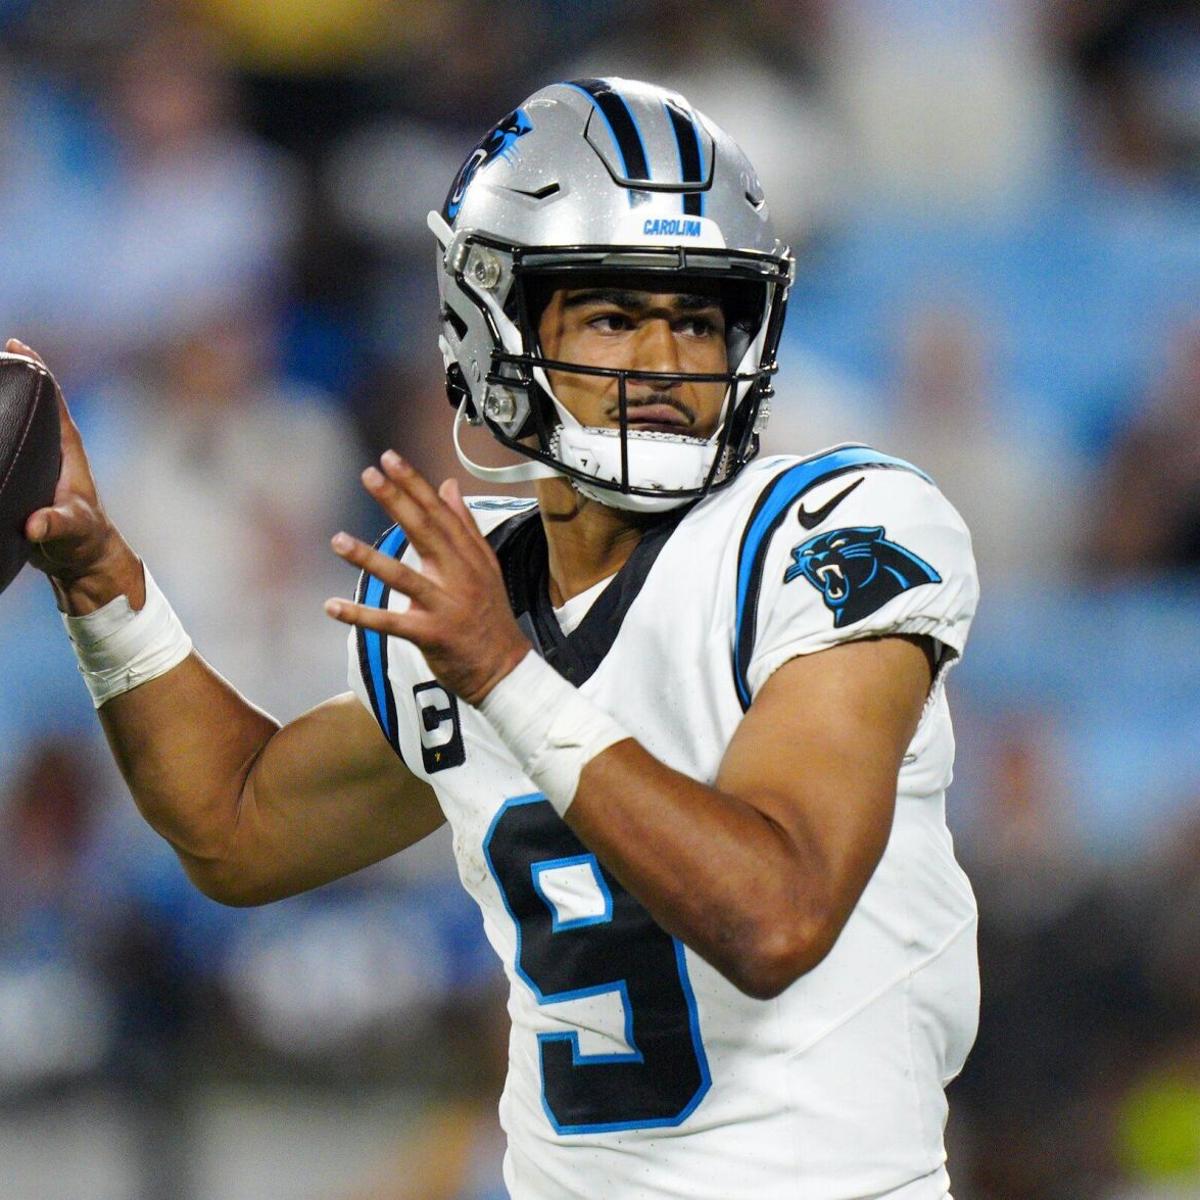 What to know about the Seahawks' Week 3 opponent, the Carolina